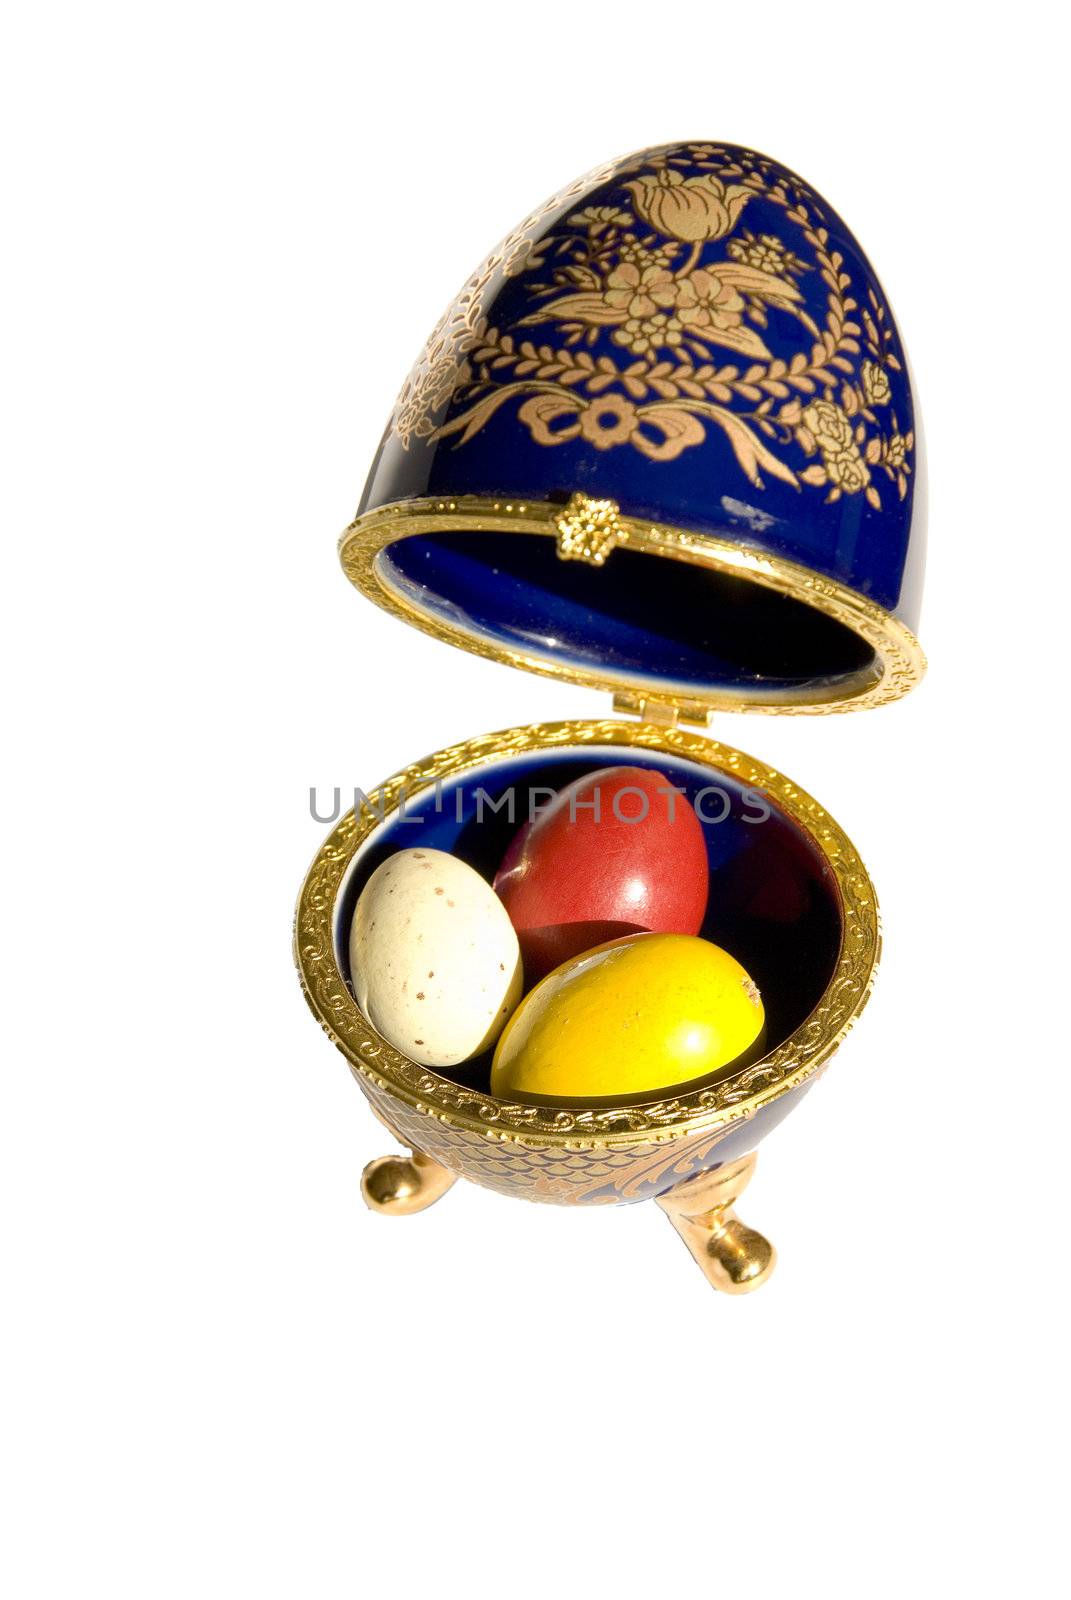 Decoration of Faberge copy with real colored Easter eggs in it isolated on a white background